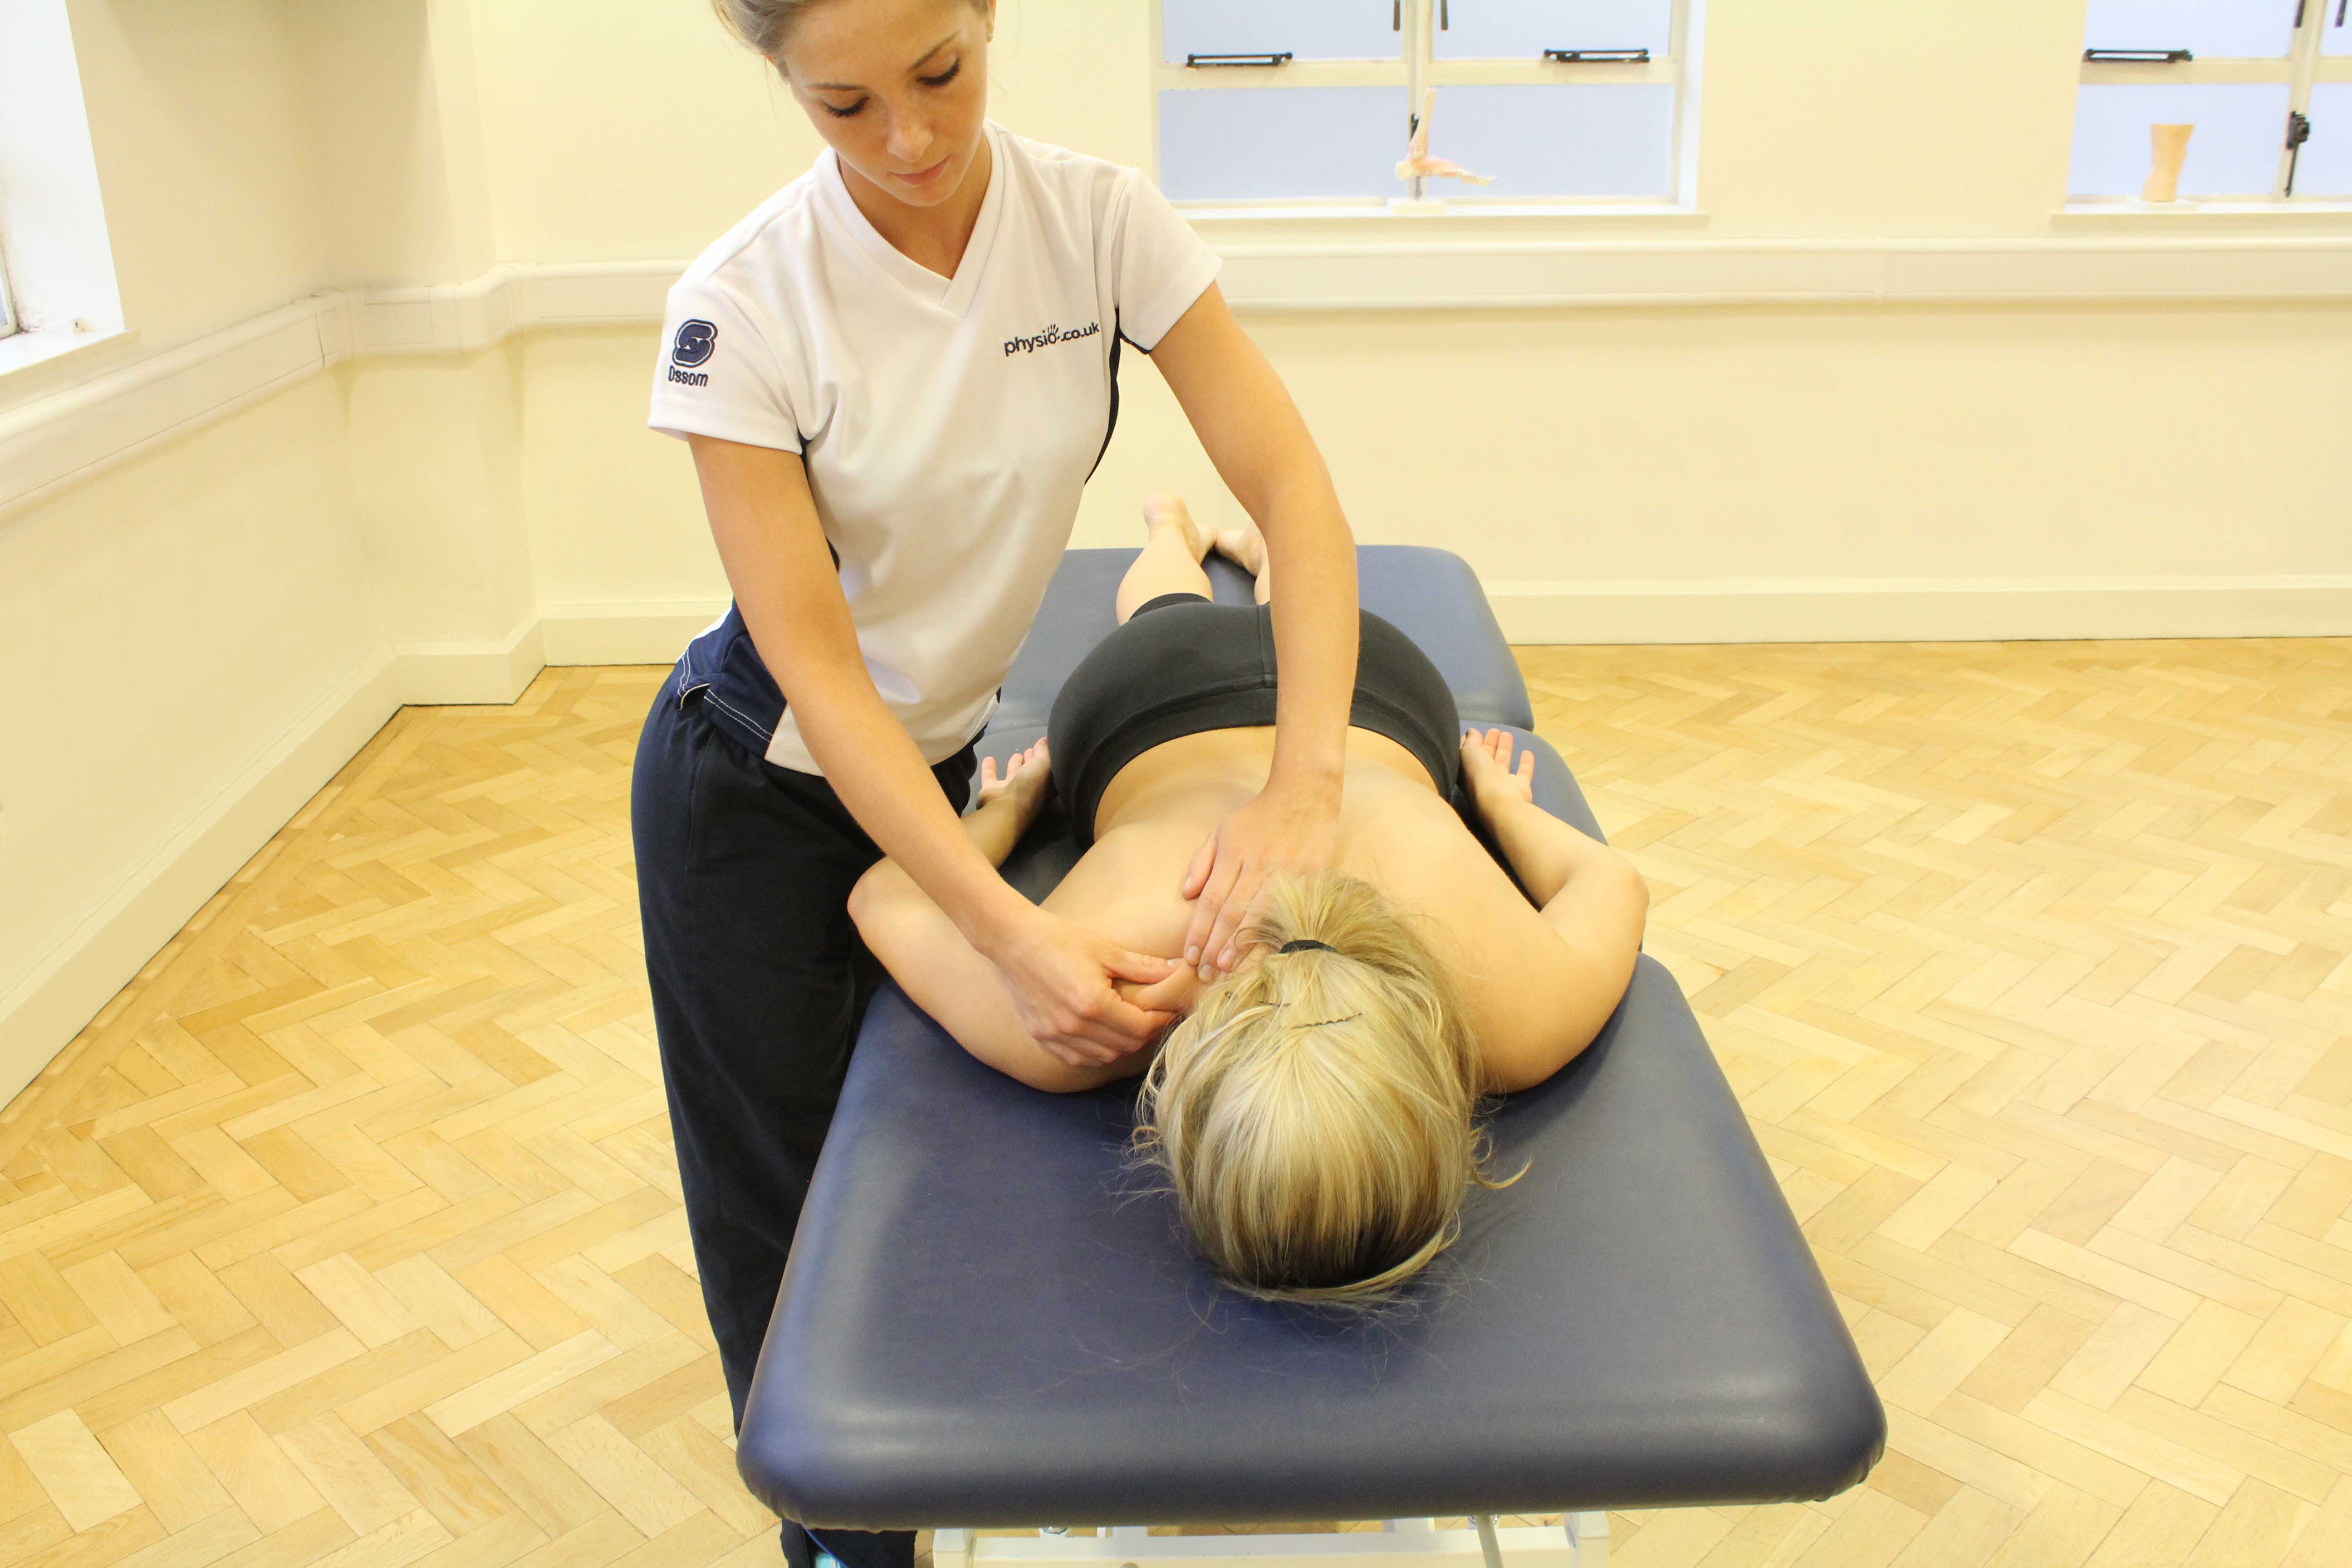 Massage and mobilisations of the trapezious muscles and cervical vertebrea to relieve pain and stiffness